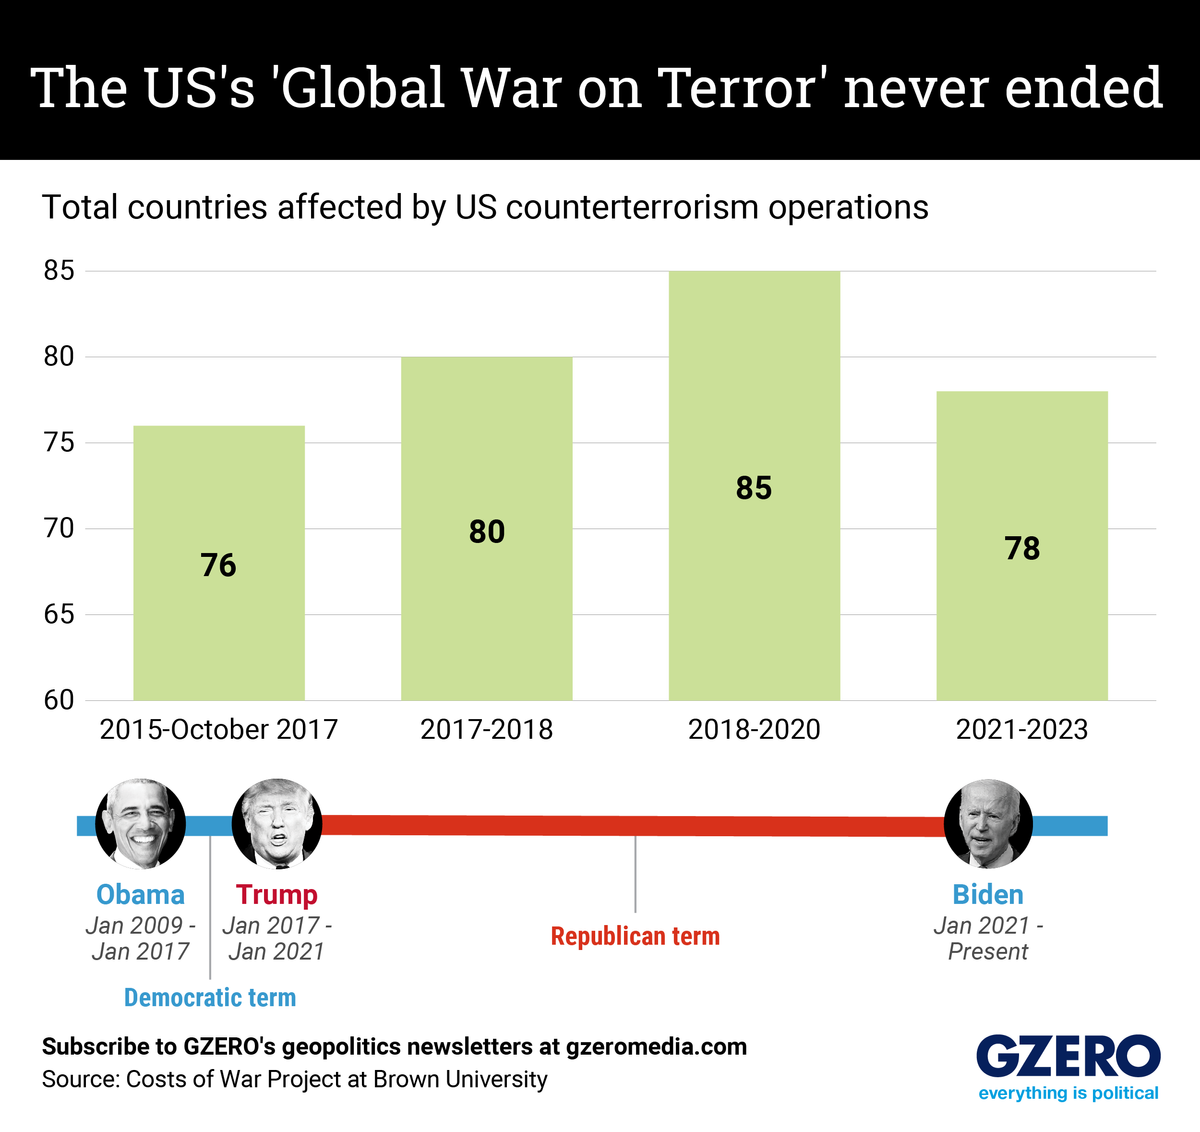 Graphic Truth: The US's "Global War on Terror" never ended